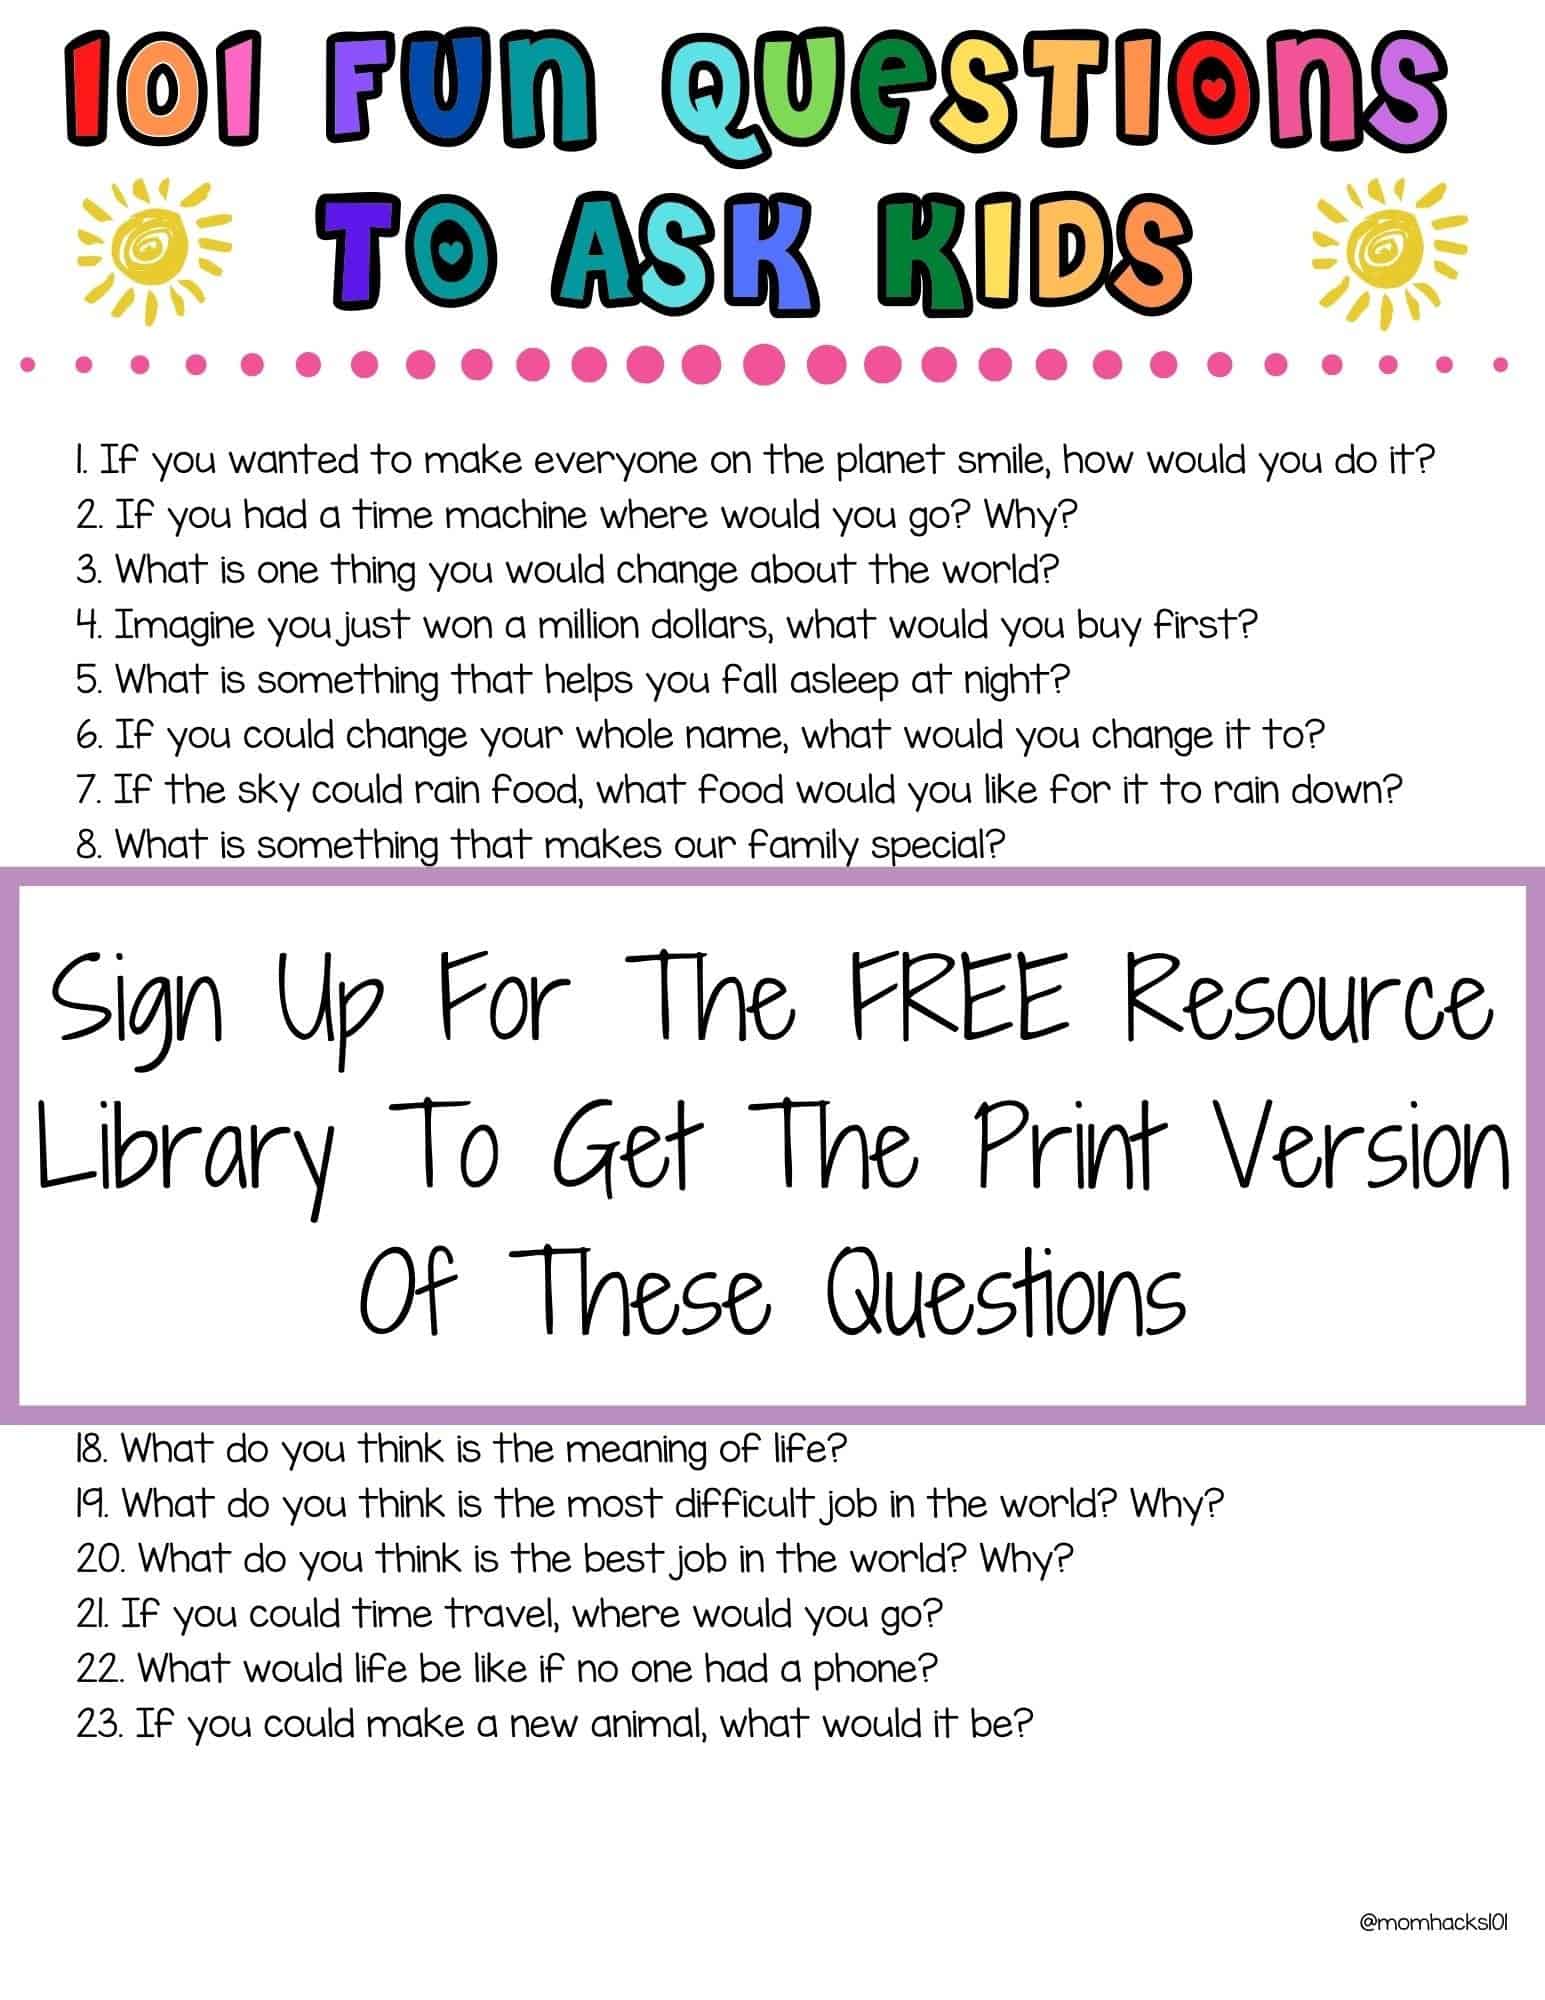 Fun questions to ask kids